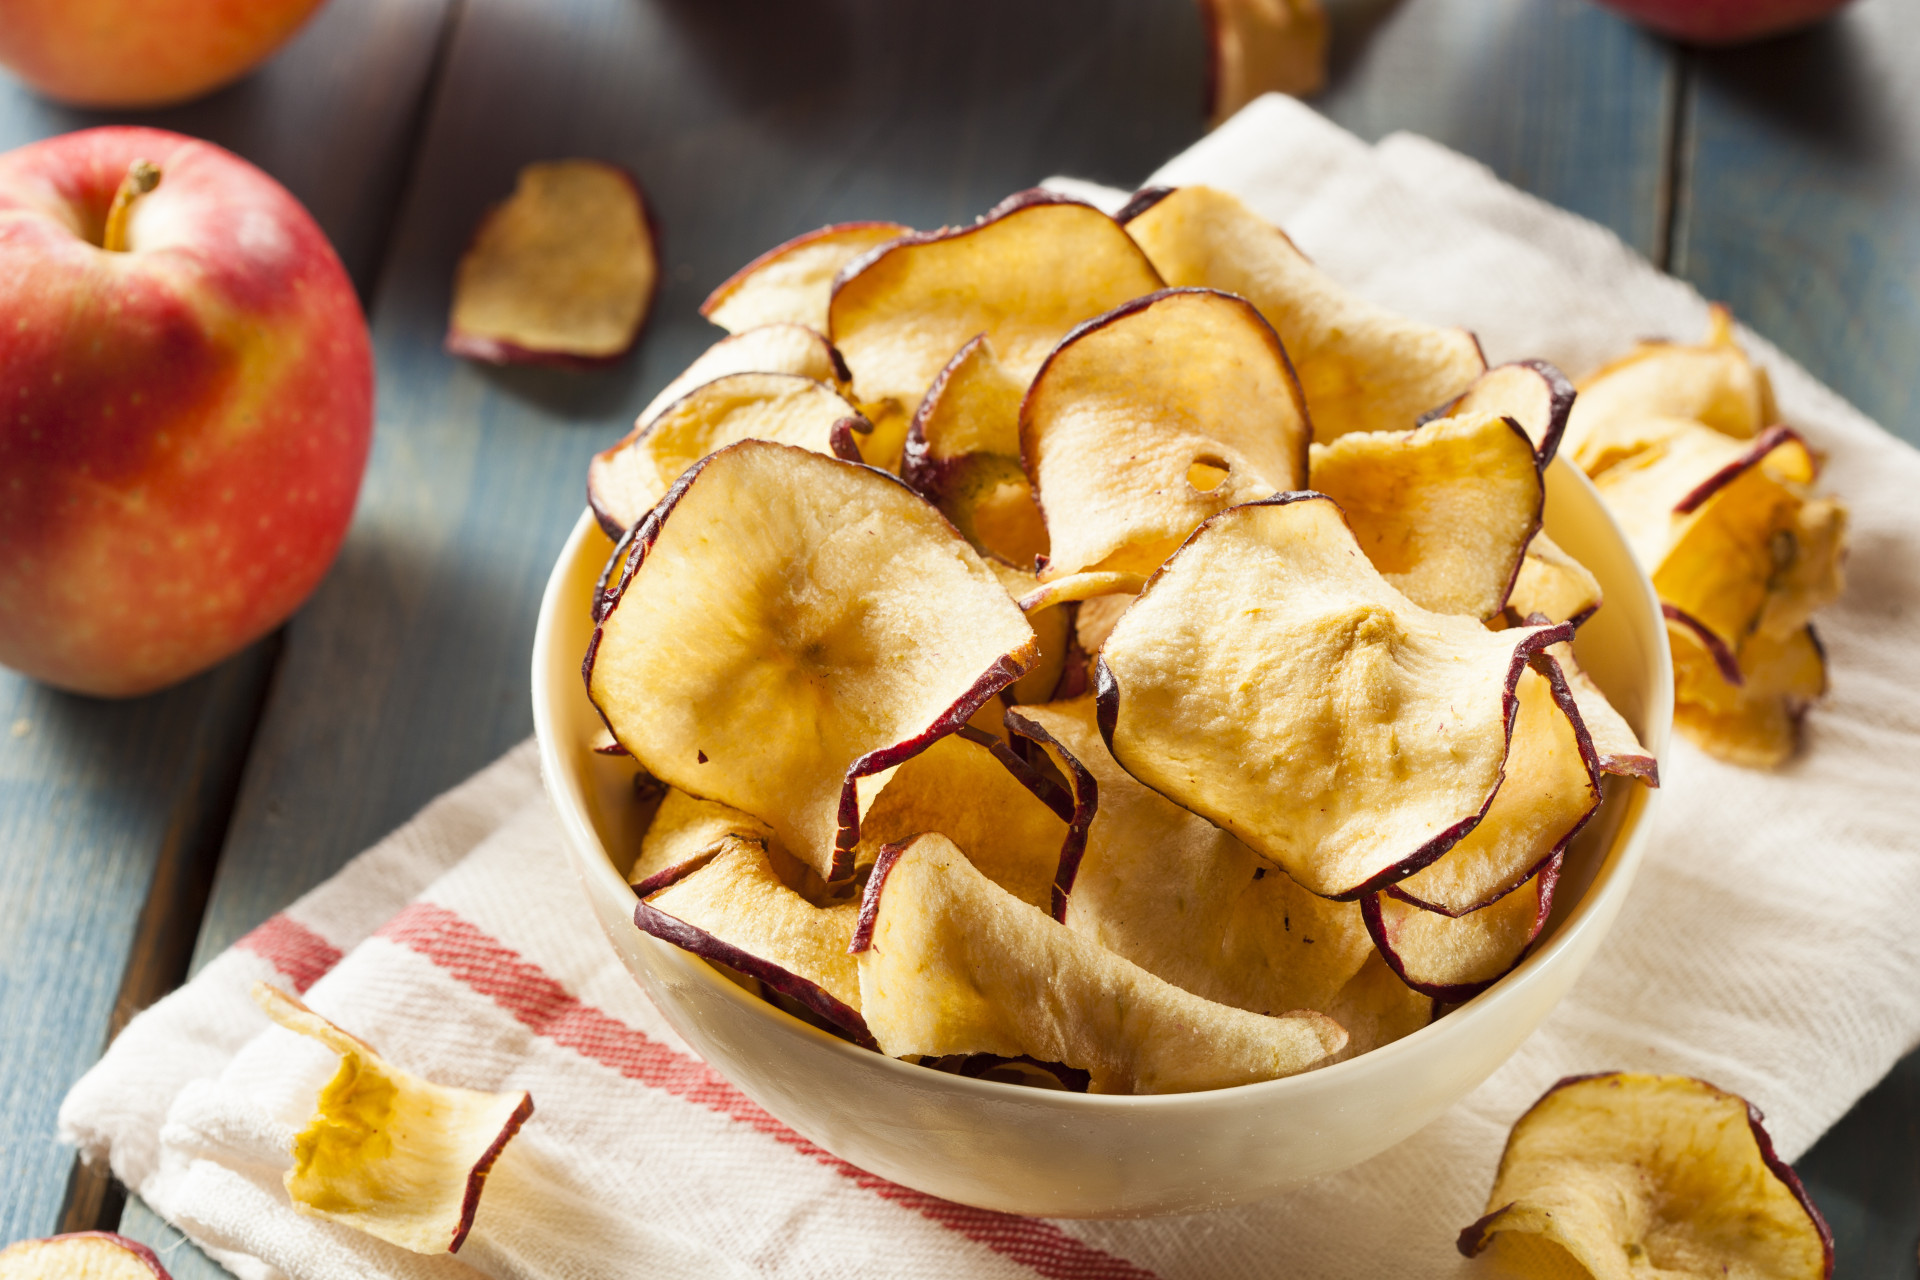 The crunch of a chip and the caramelized sweetness of candy, but low in fat and high in fiber! Enjoy the fresh flavor of apples without worrying about browning or refrigeration.<p>You may also like:<a href="https://www.starsinsider.com/n/489471?utm_source=msn.com&utm_medium=display&utm_campaign=referral_description&utm_content=356024v3en-us"> The 30 most essential cult-favorite TV series of all time</a></p>